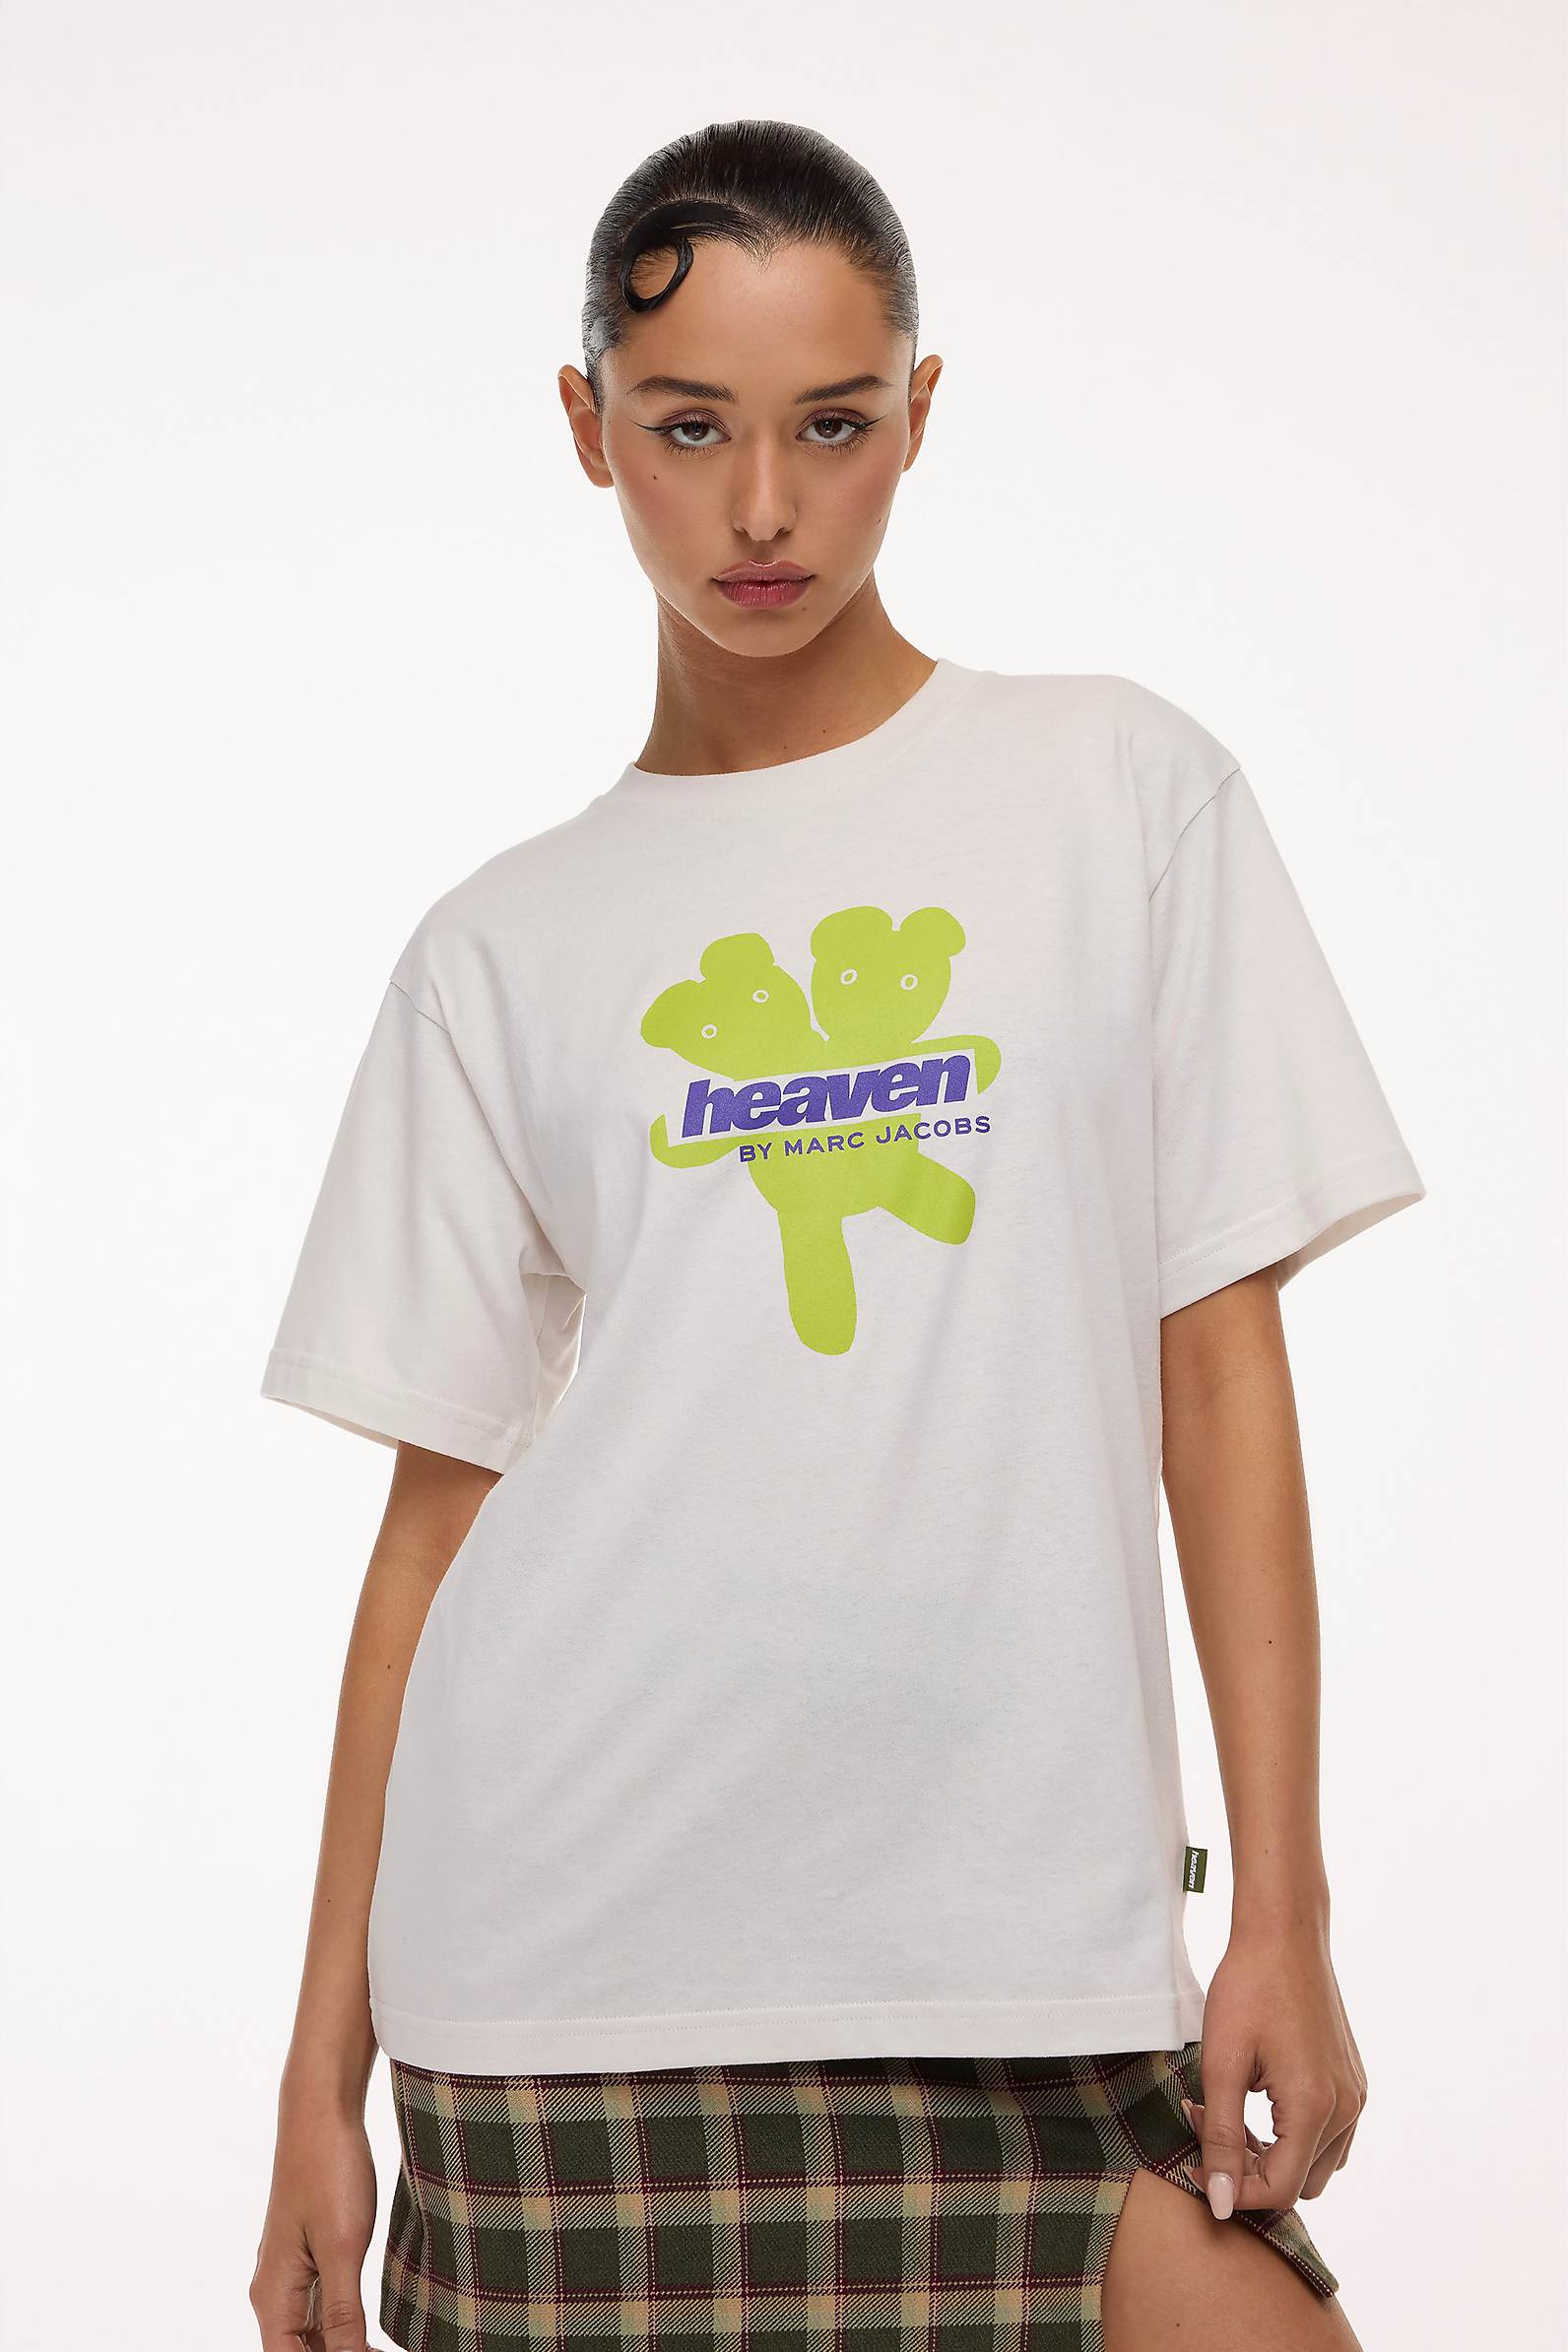 Heaven by Marc Jacobs Tシャツ | nate-hospital.com